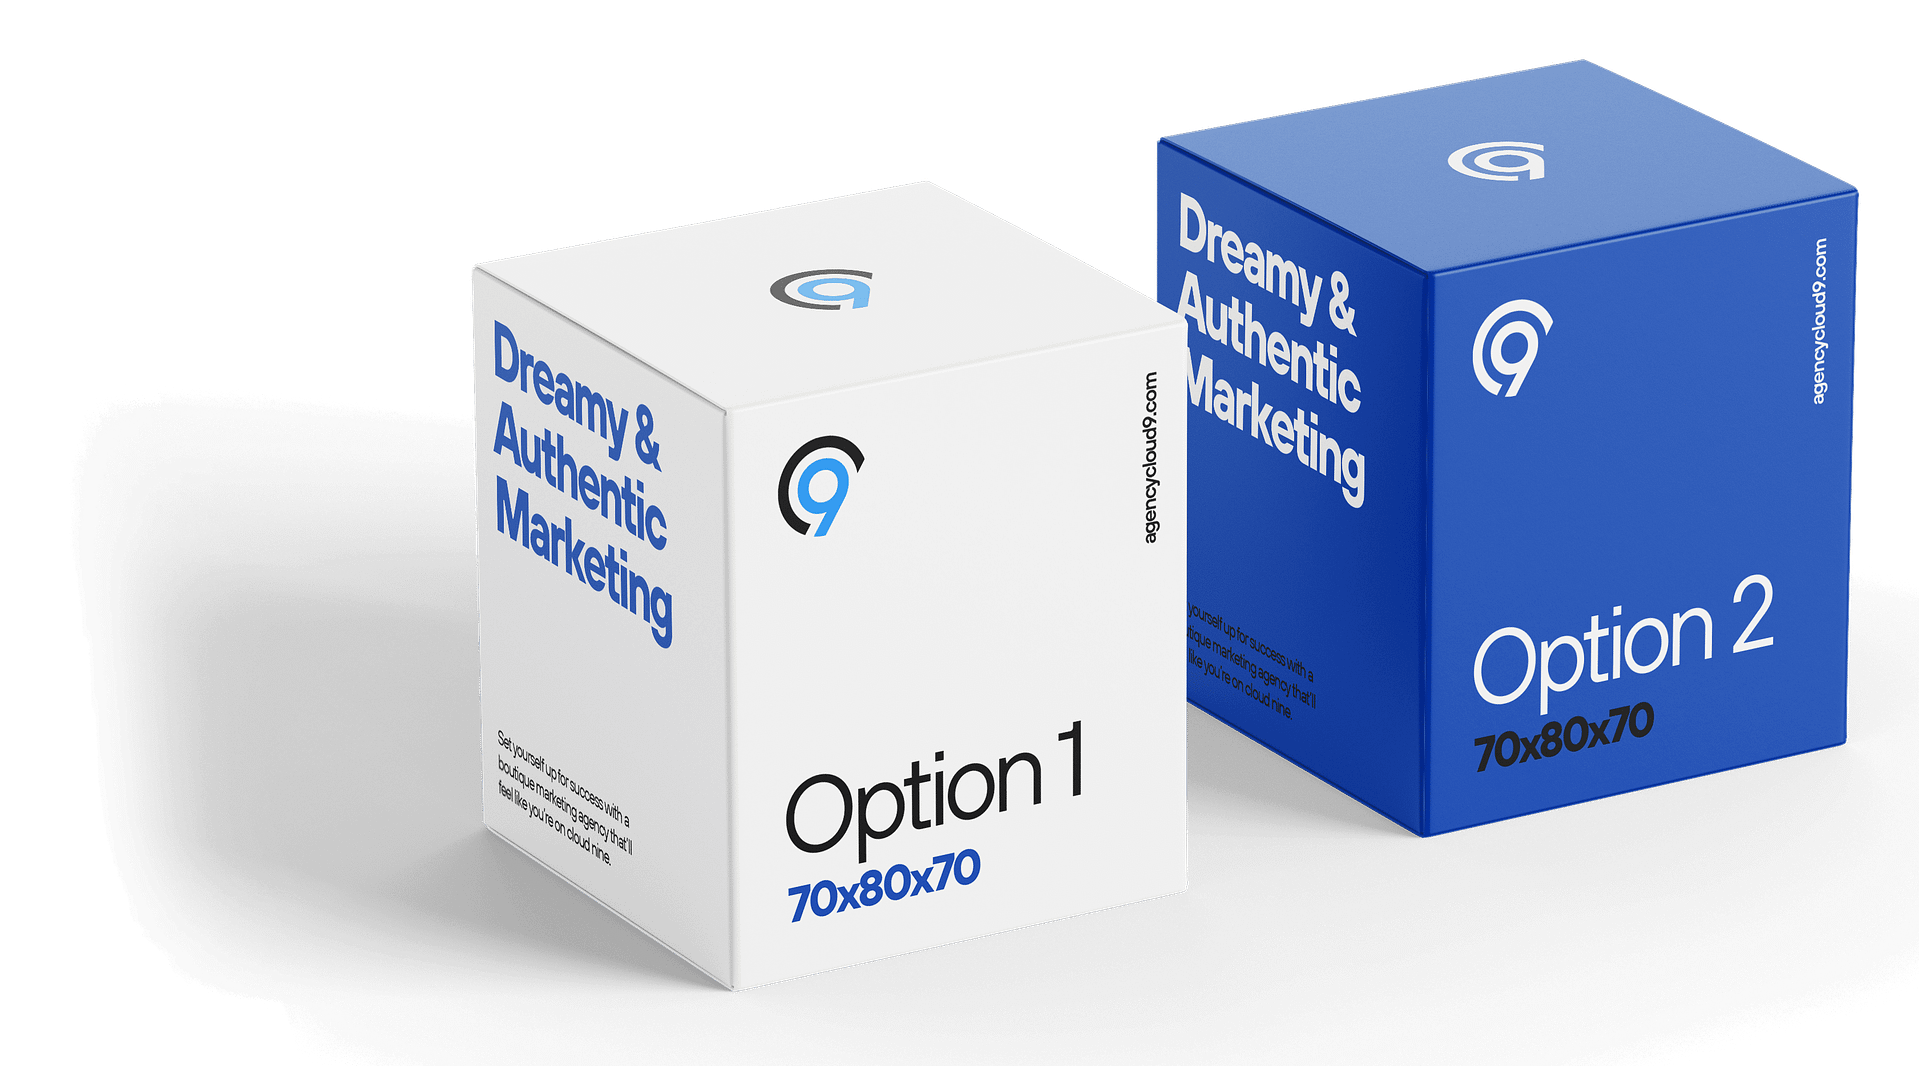 A/B testing with 2 options, boxes with packaging